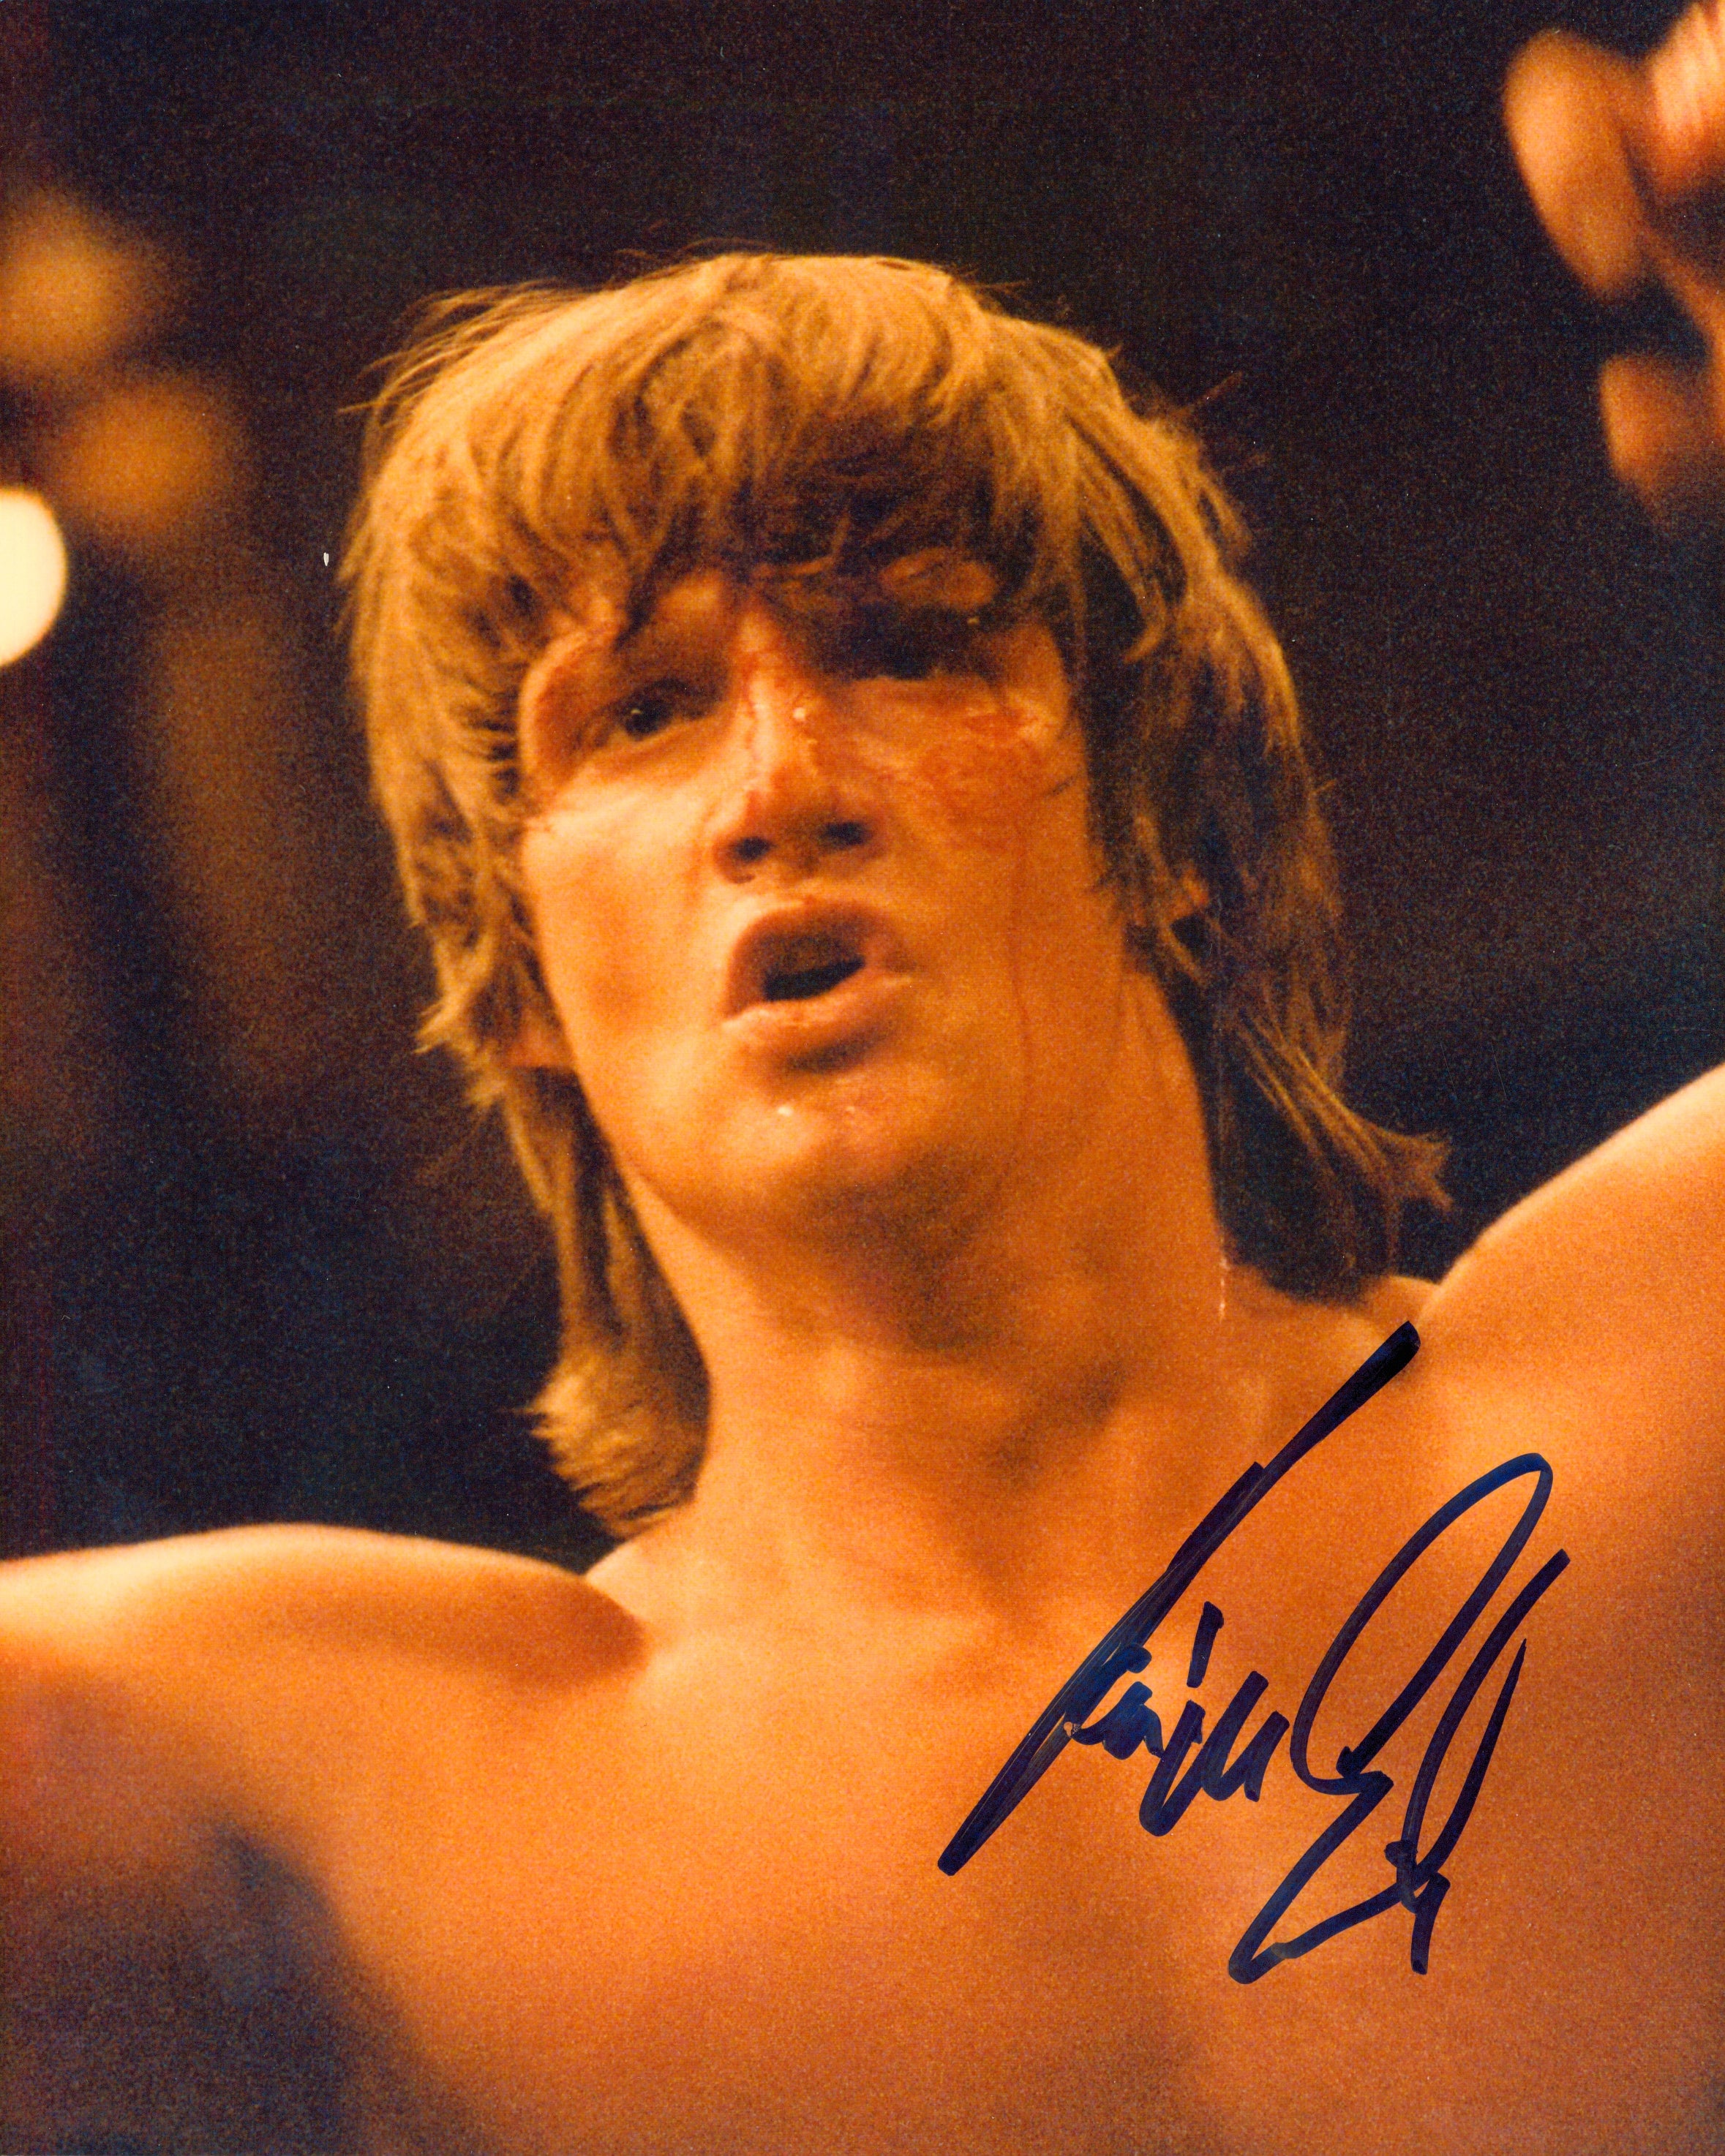 Kevin Von Erich & Michael Hayes dual signed 8x10 Photo – Signed By